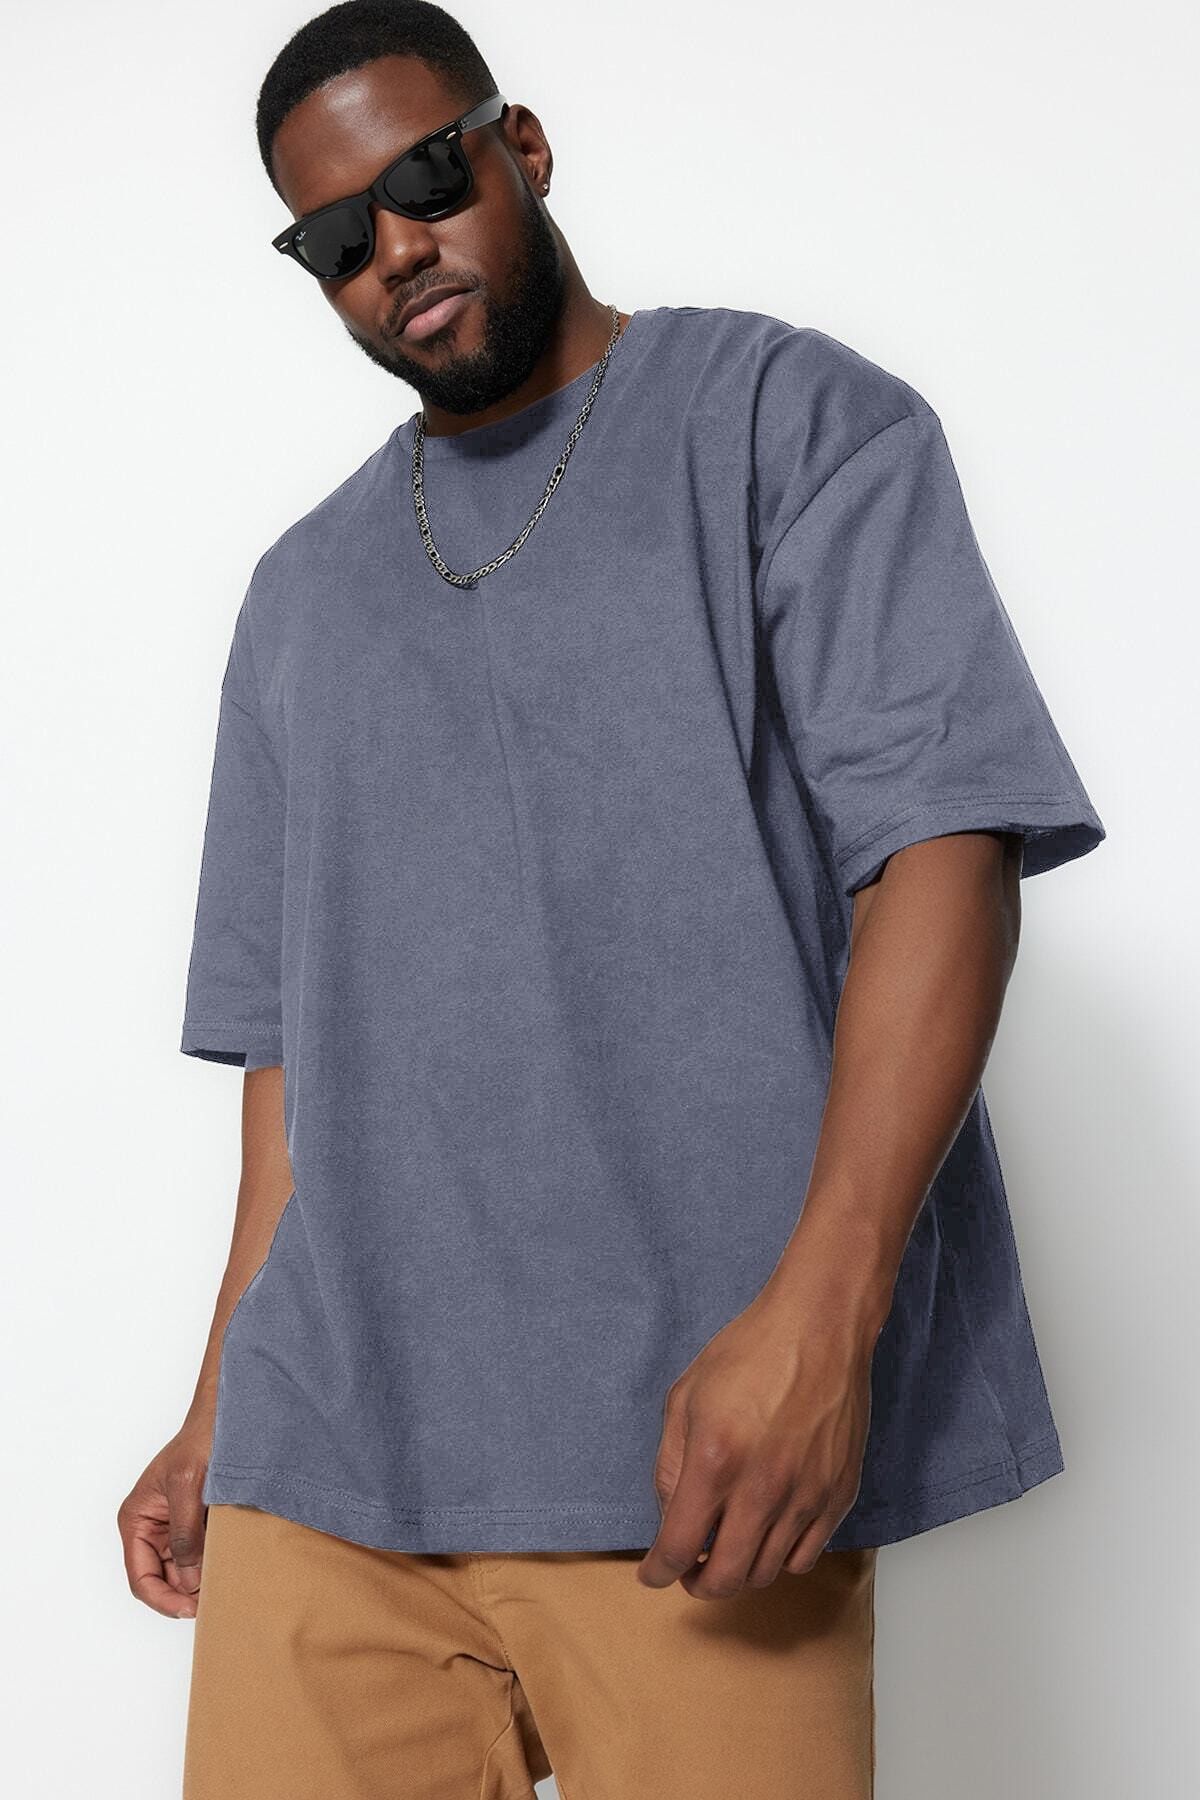 T Shirt Oversize Cotton Mens Summer Tshirts Oversized Tee Shirts 5XL for  Man Streetwear Big Size (Color : B Size : 4XL Code) (A XL Code)